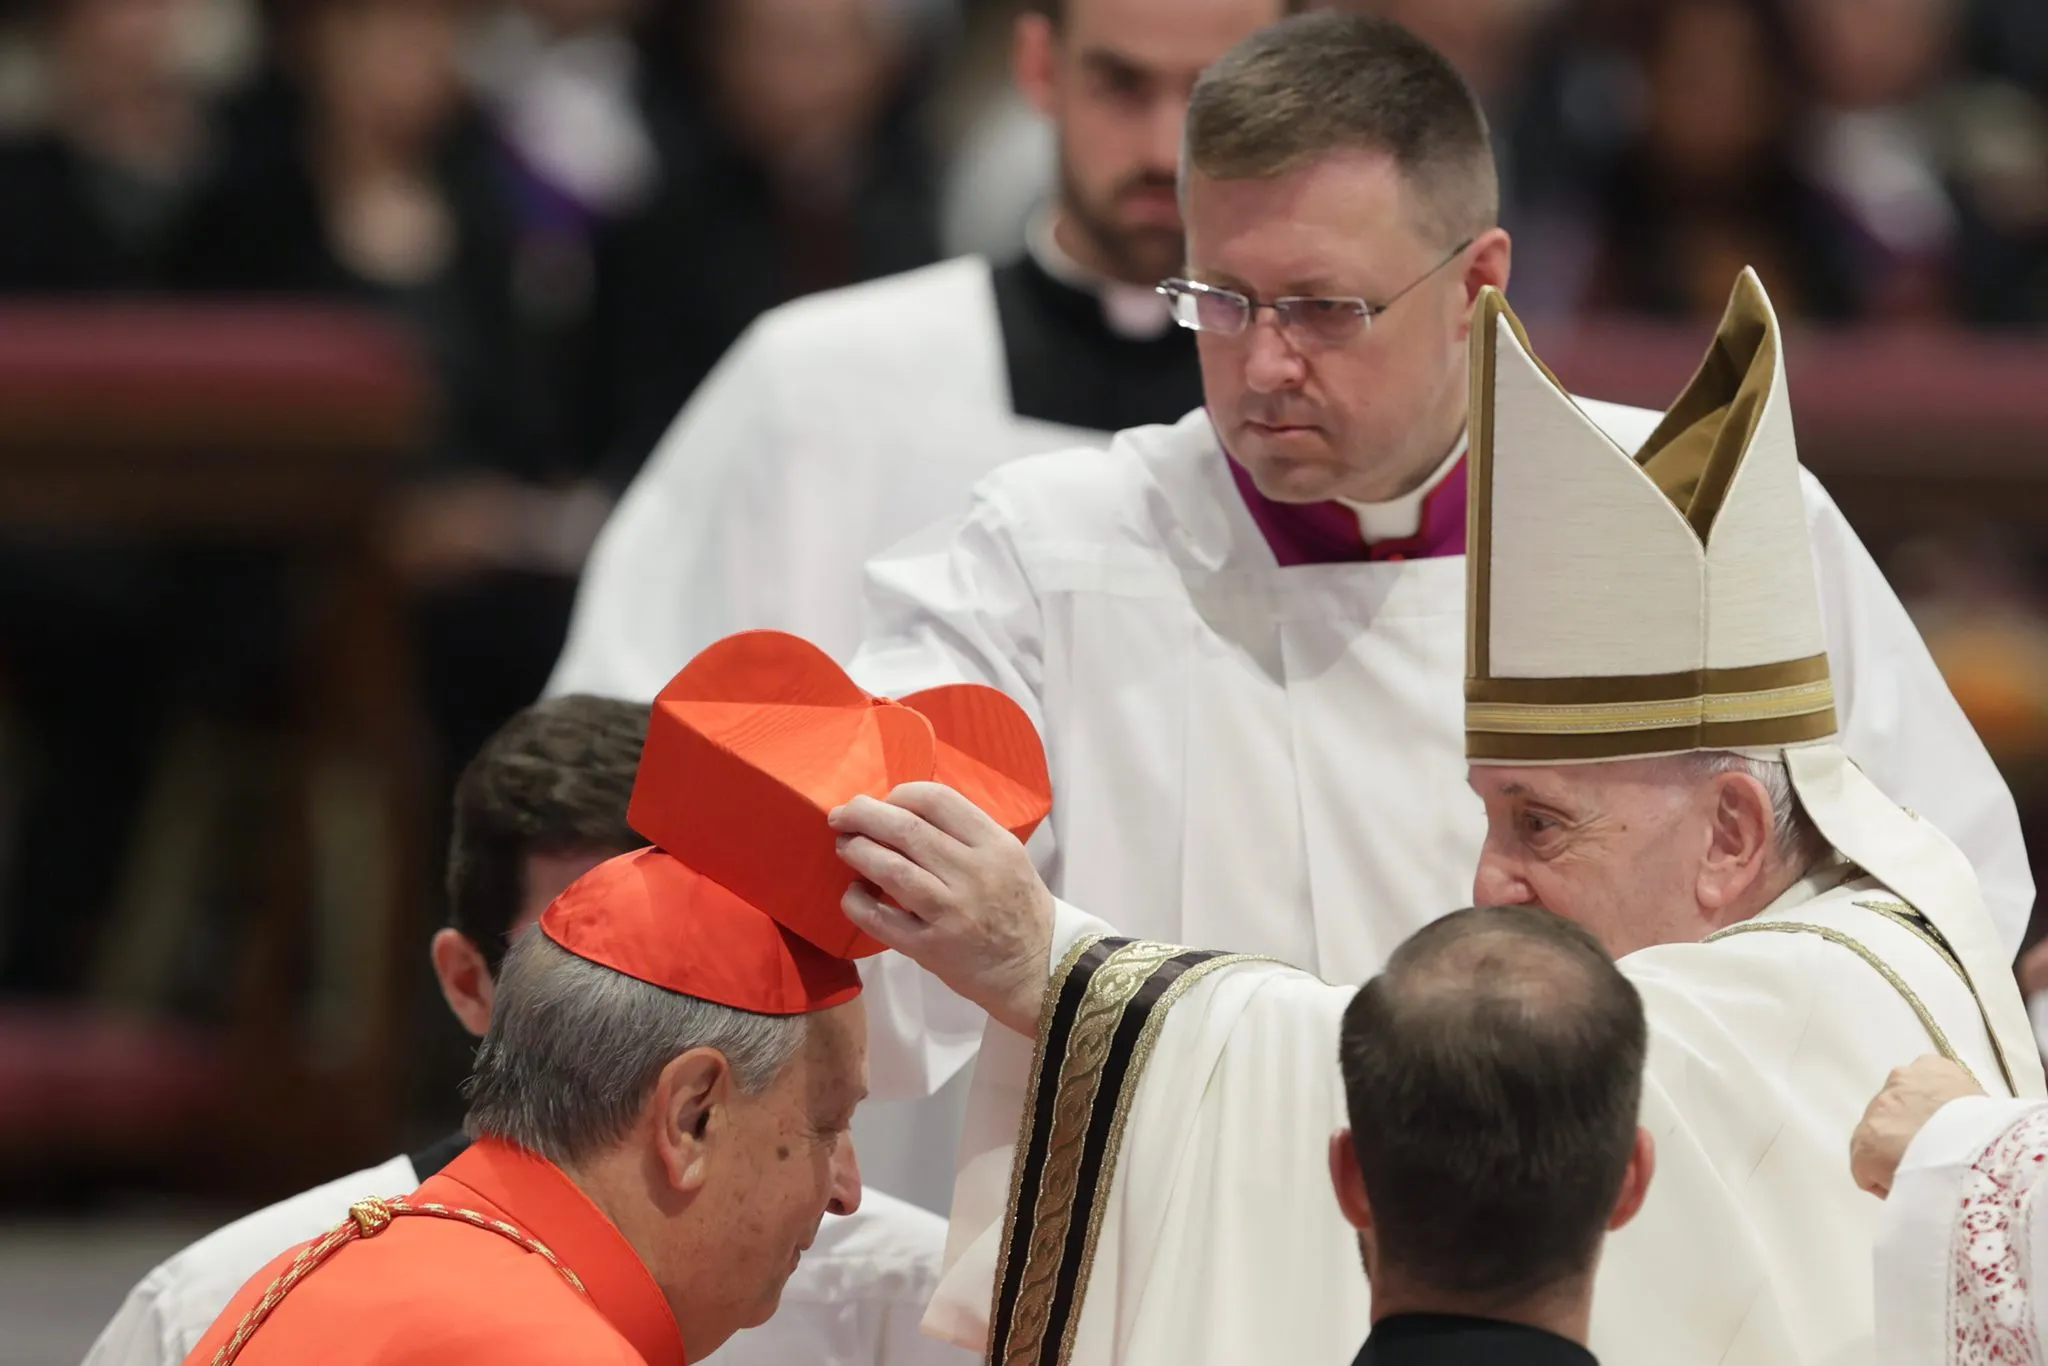 Cardinal Oscar Cantoni, bishop of Como, receives the red biretta from Pope Francis at the consistory in St. Peter's Basilica, Aug. 27, 2022.?w=200&h=150